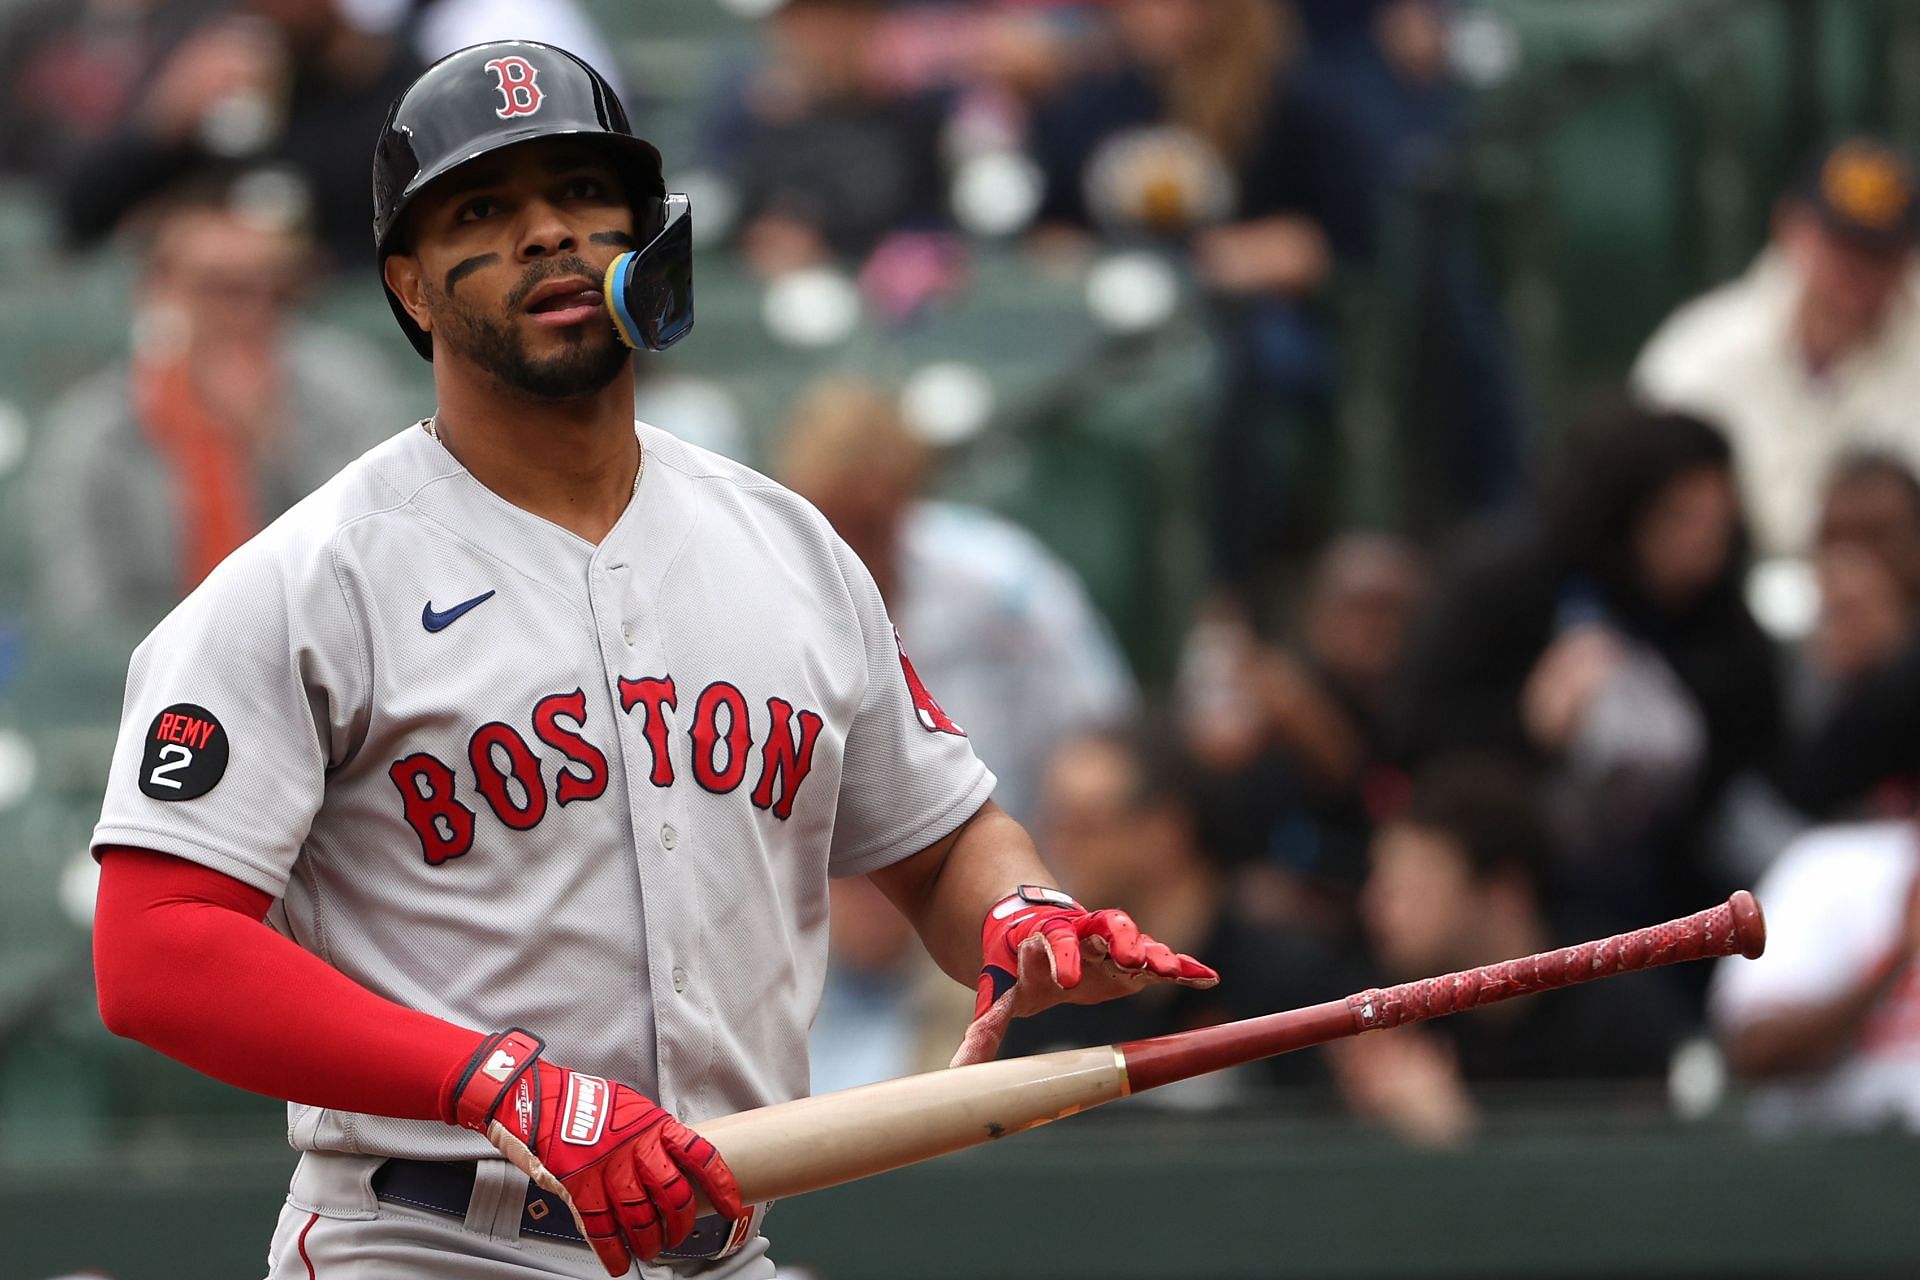 Xander Bogaerts is one of the few bright spots for the Boston Red Sox this season